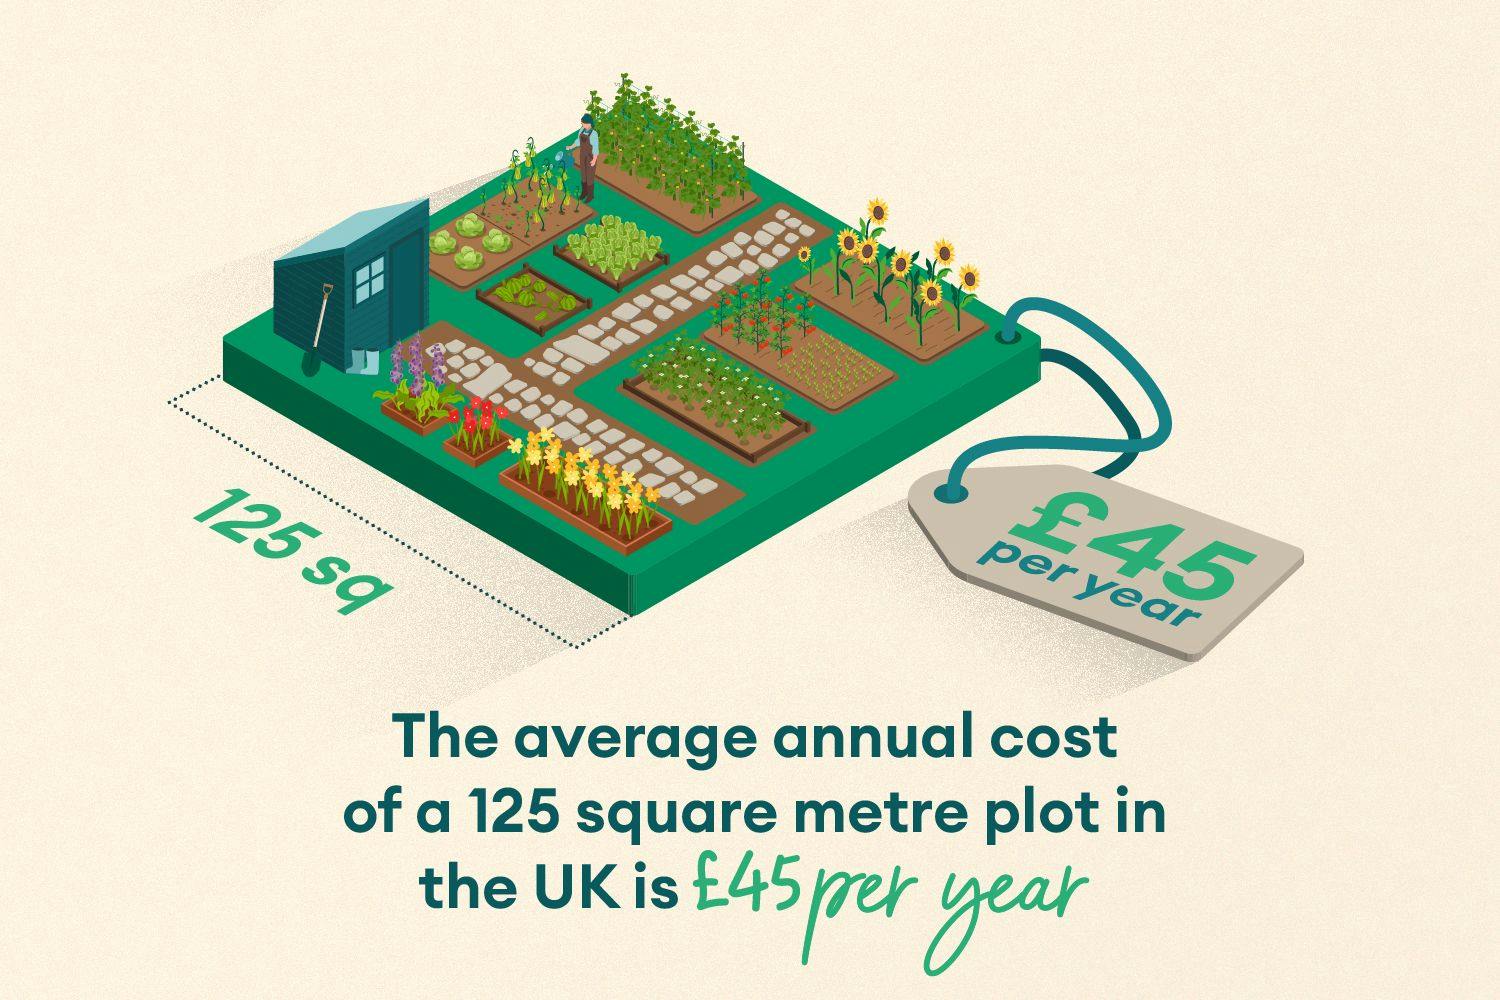 the average annual cost of a 125 square metre plot in the UK is £45 per year